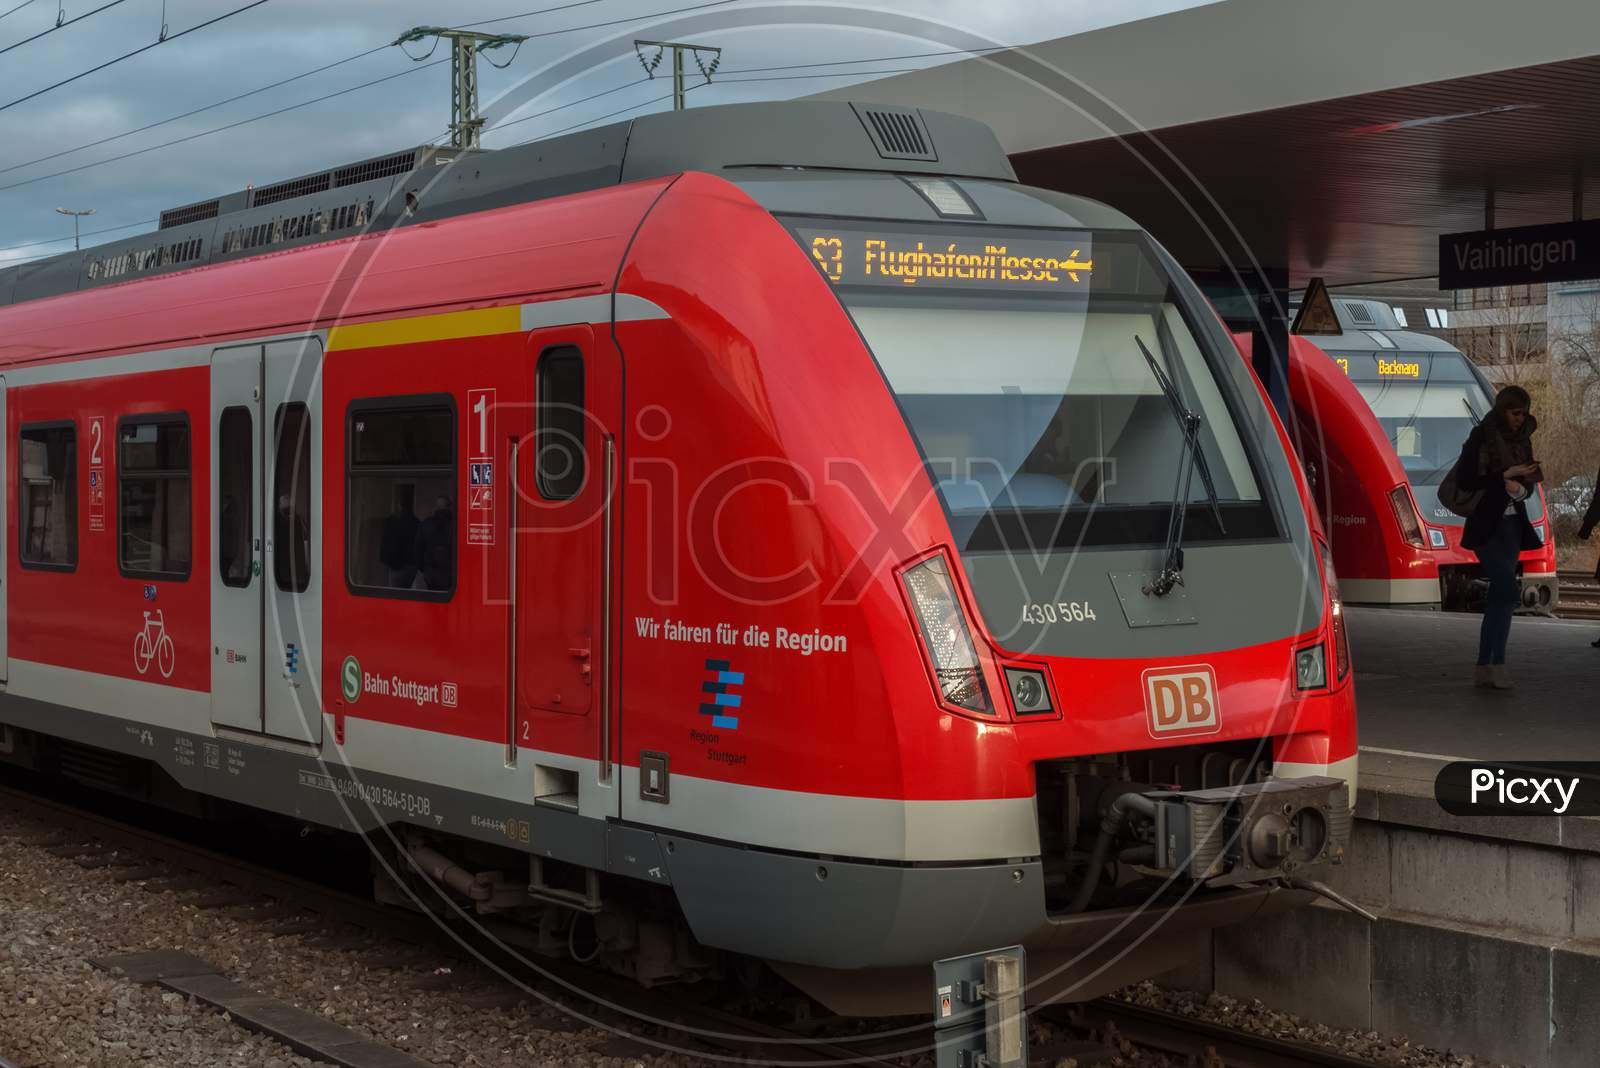 Stuttgart,Germany - January 29,2018: Vaihingen This Is A Train At The Station,Which Is Near The Industrial Area.Vaihingen Is A District At The Edge Of The City.